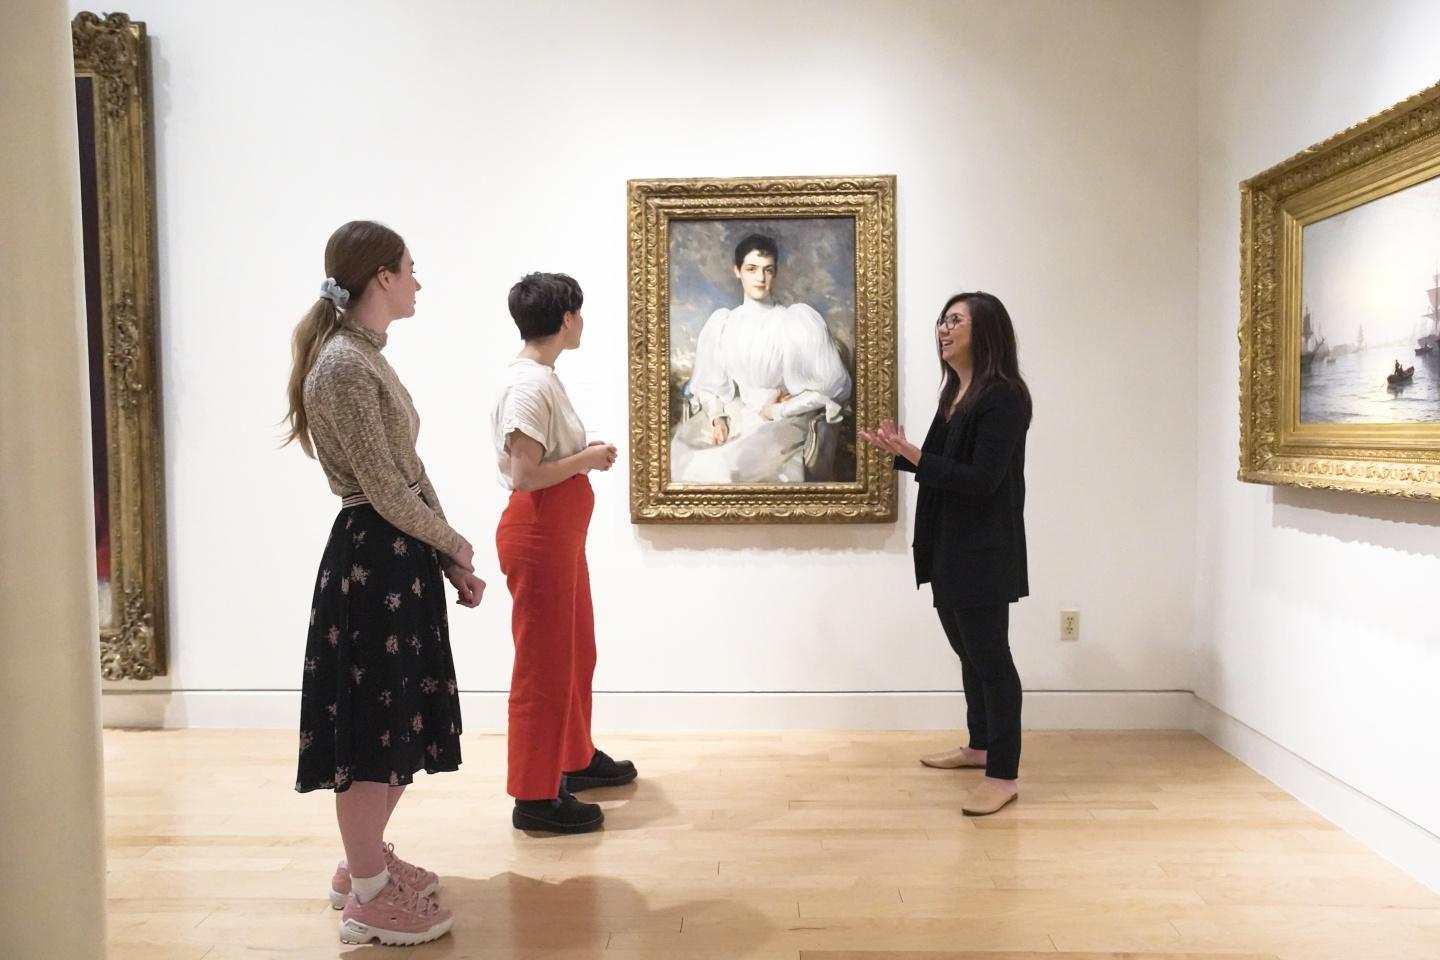 2 People standing in front of a portrait with a docent